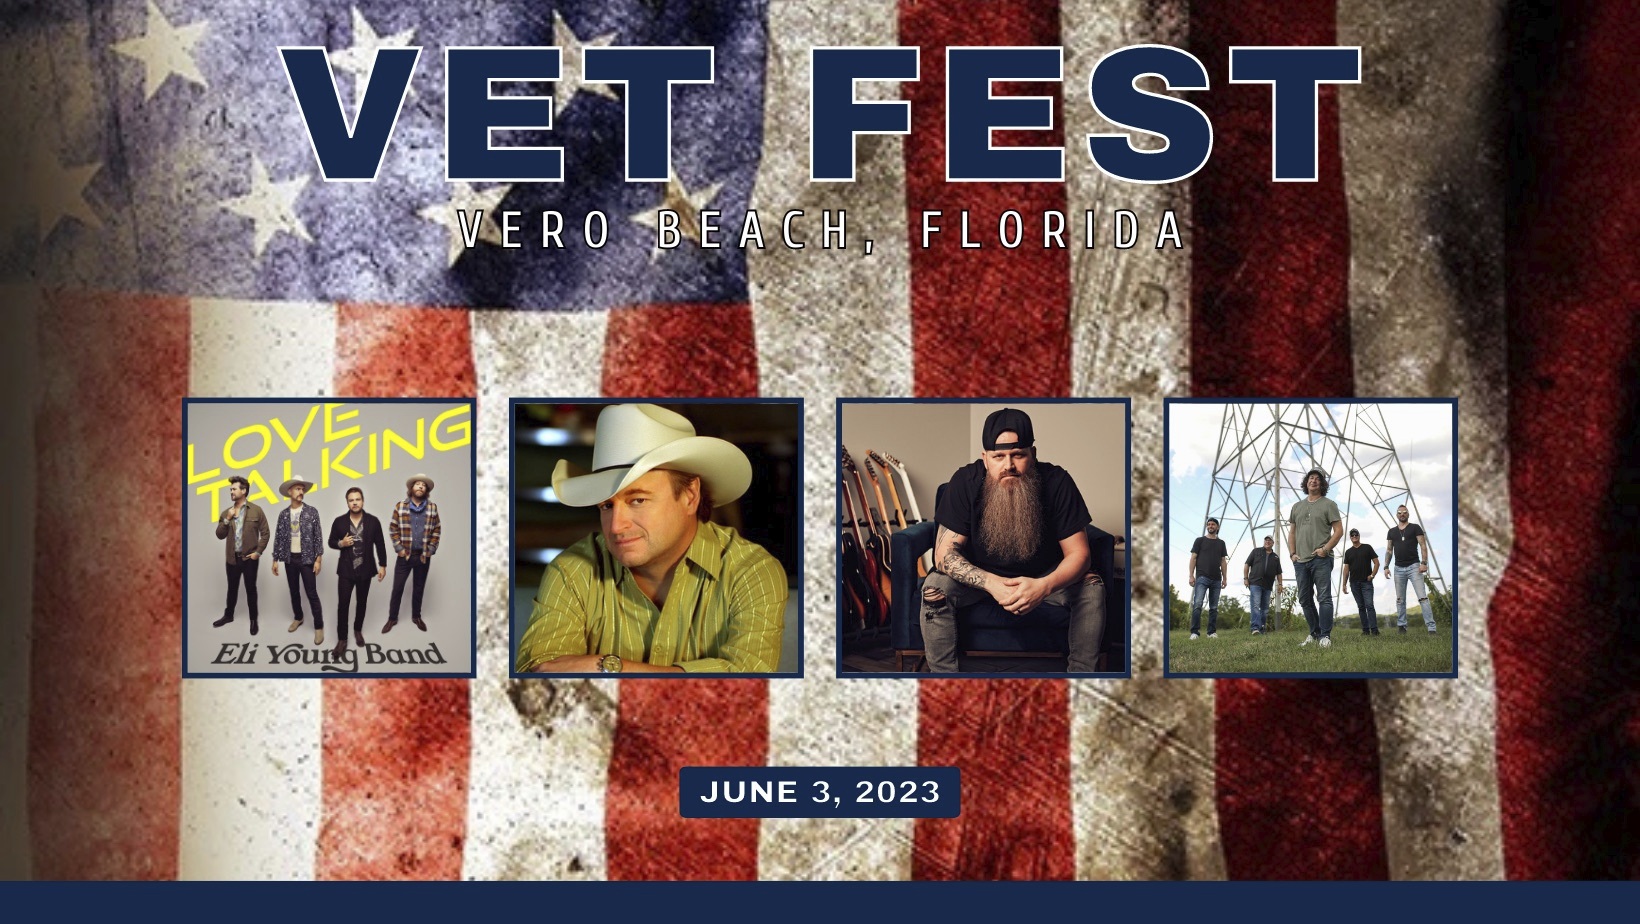 Coming Up! Country acts highlight ‘Vet Fest’ at Fairgrounds Vero News